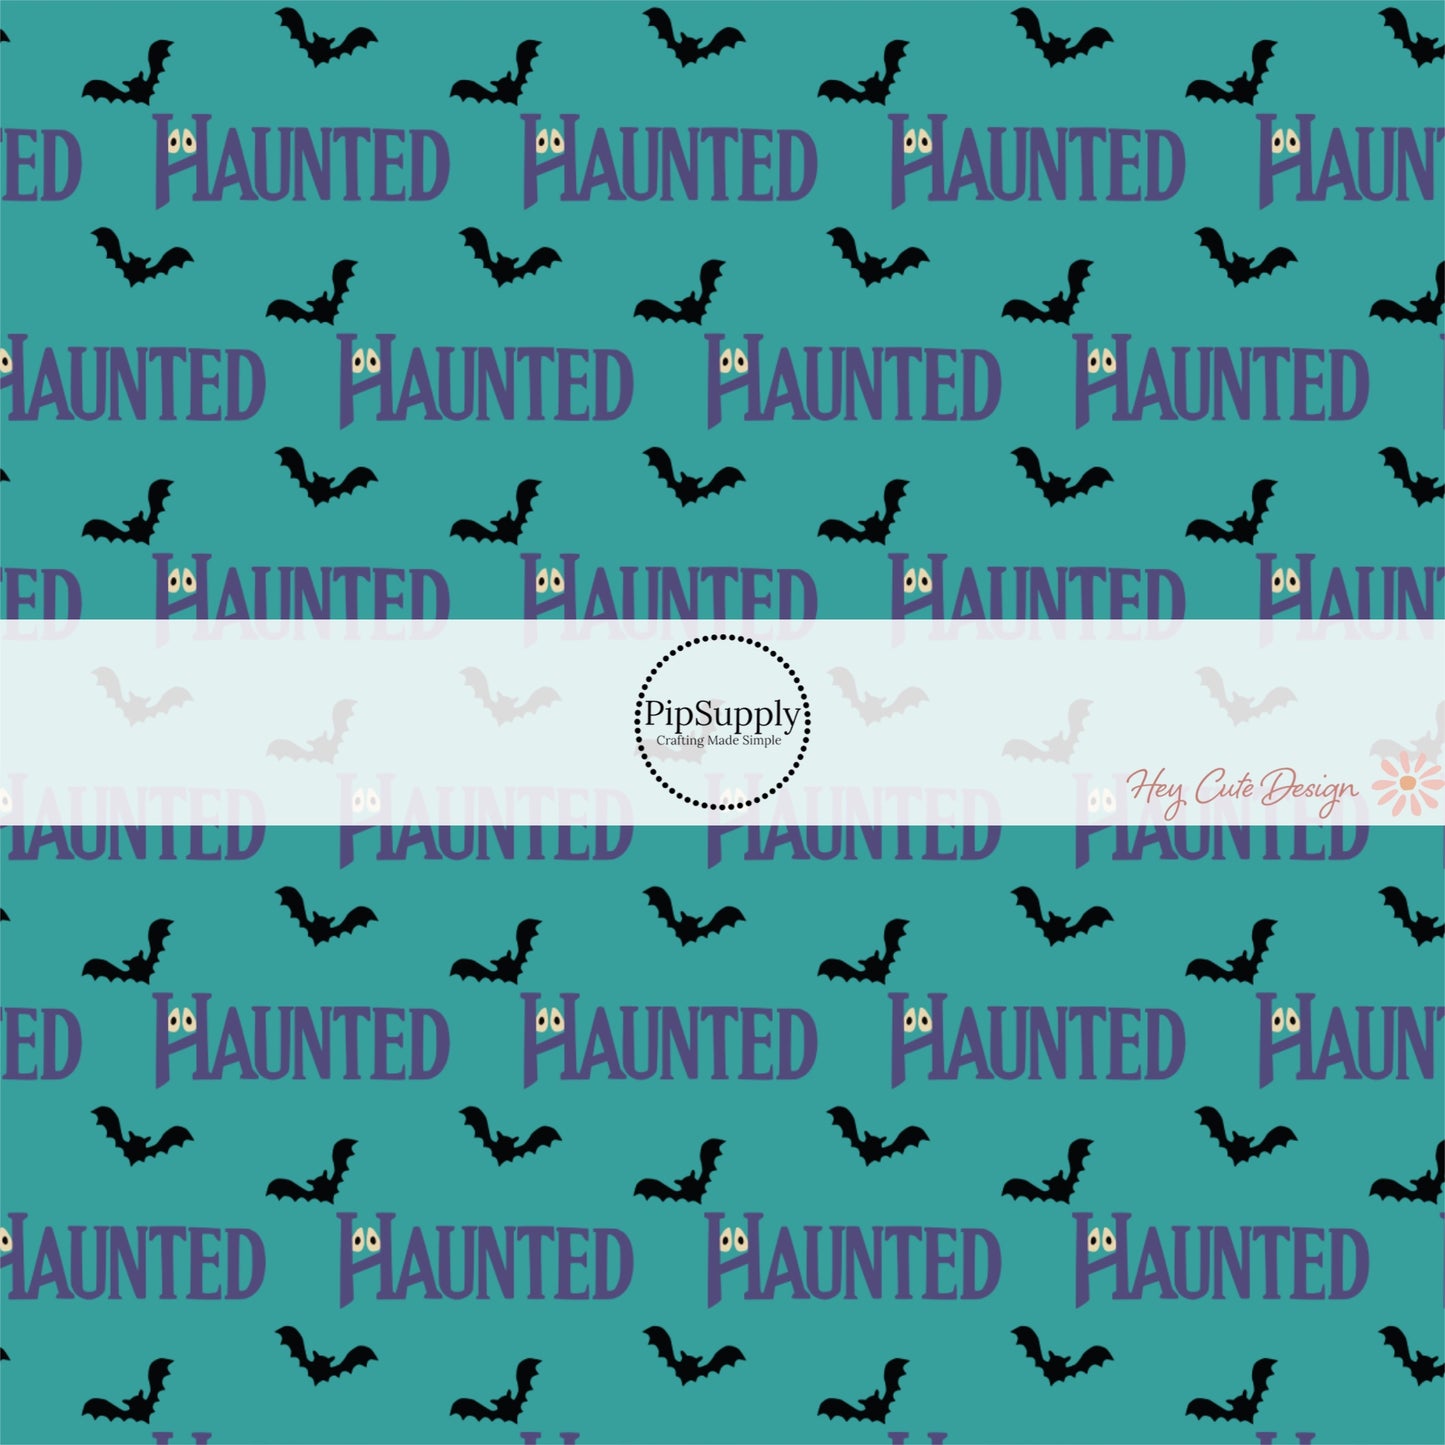 Teal Blue fabric by the yard with phrase "Haunted" and black flying bats.